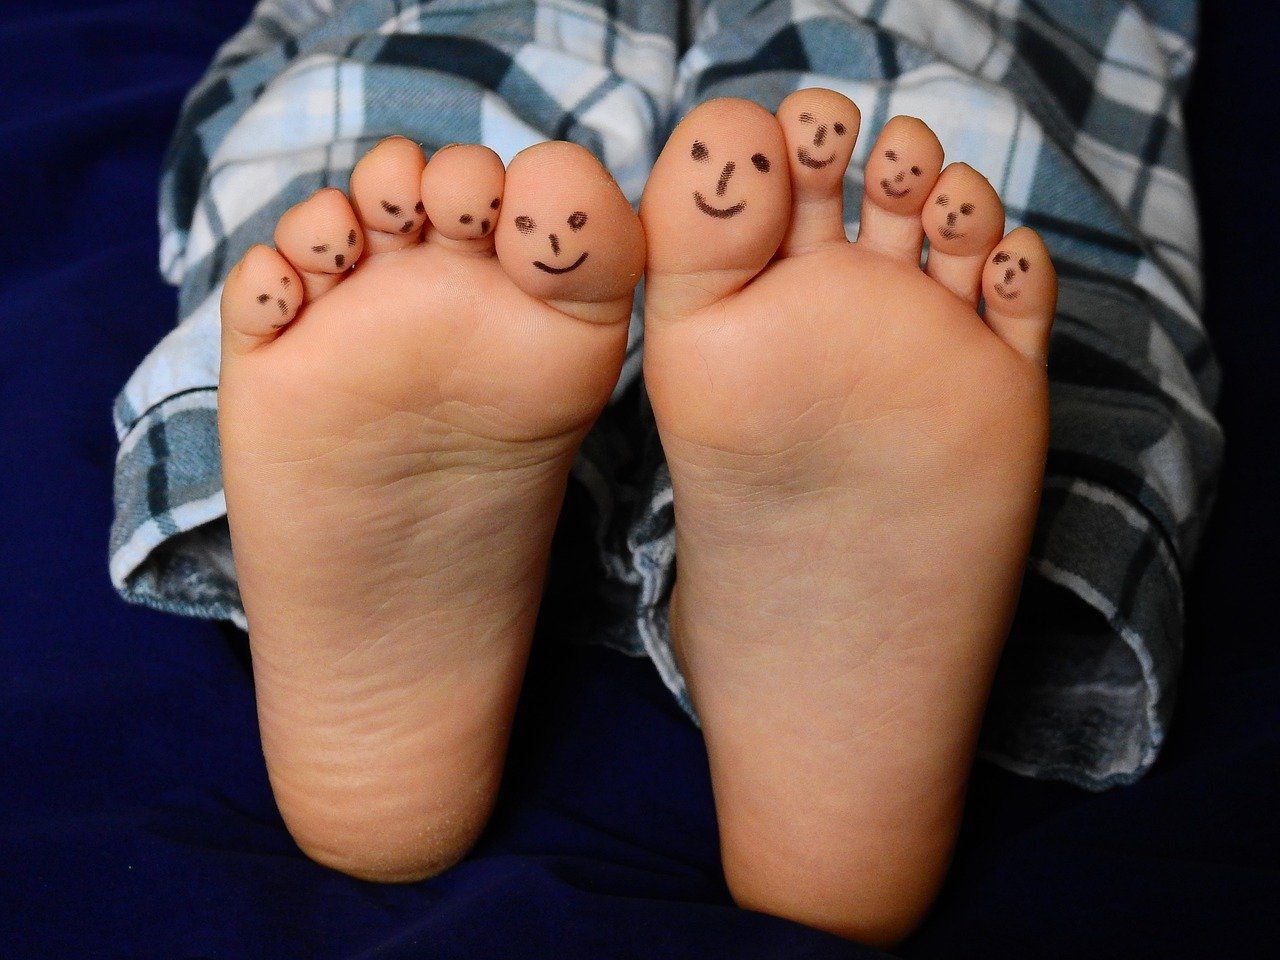 Feet with smily faces on the toes